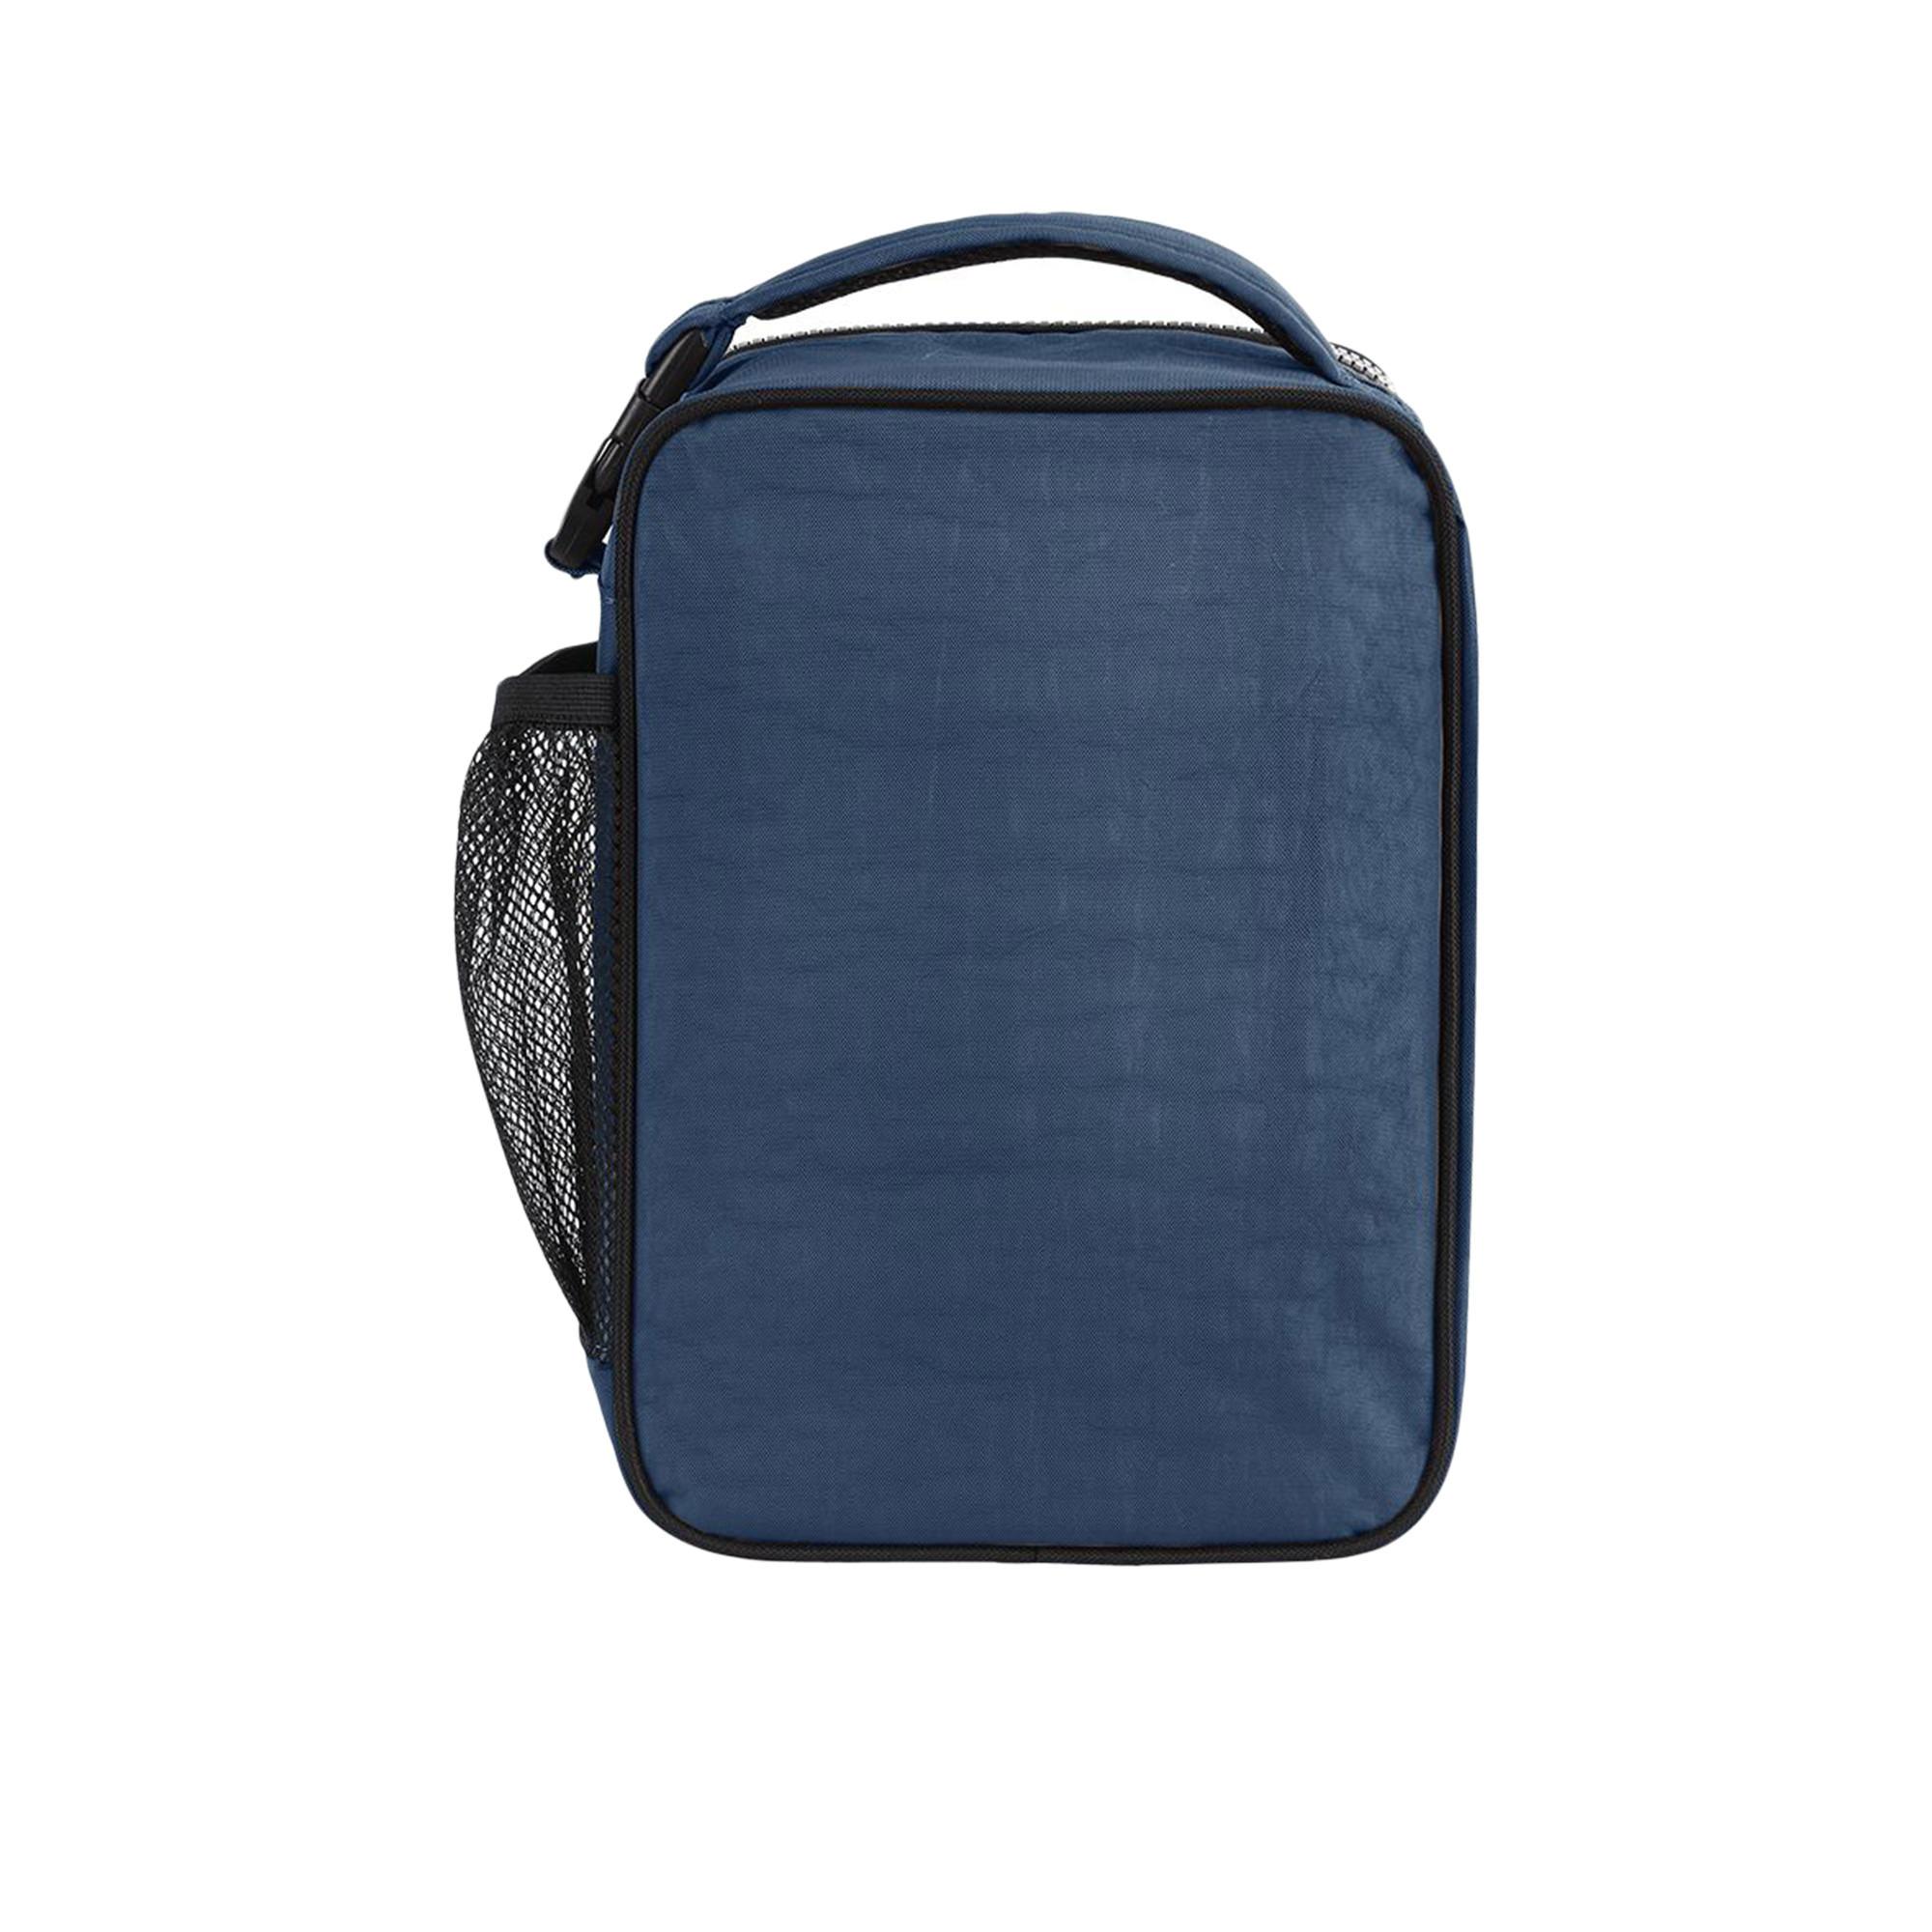 Sachi Explorer Insulated Lunch Bag Navy Image 5